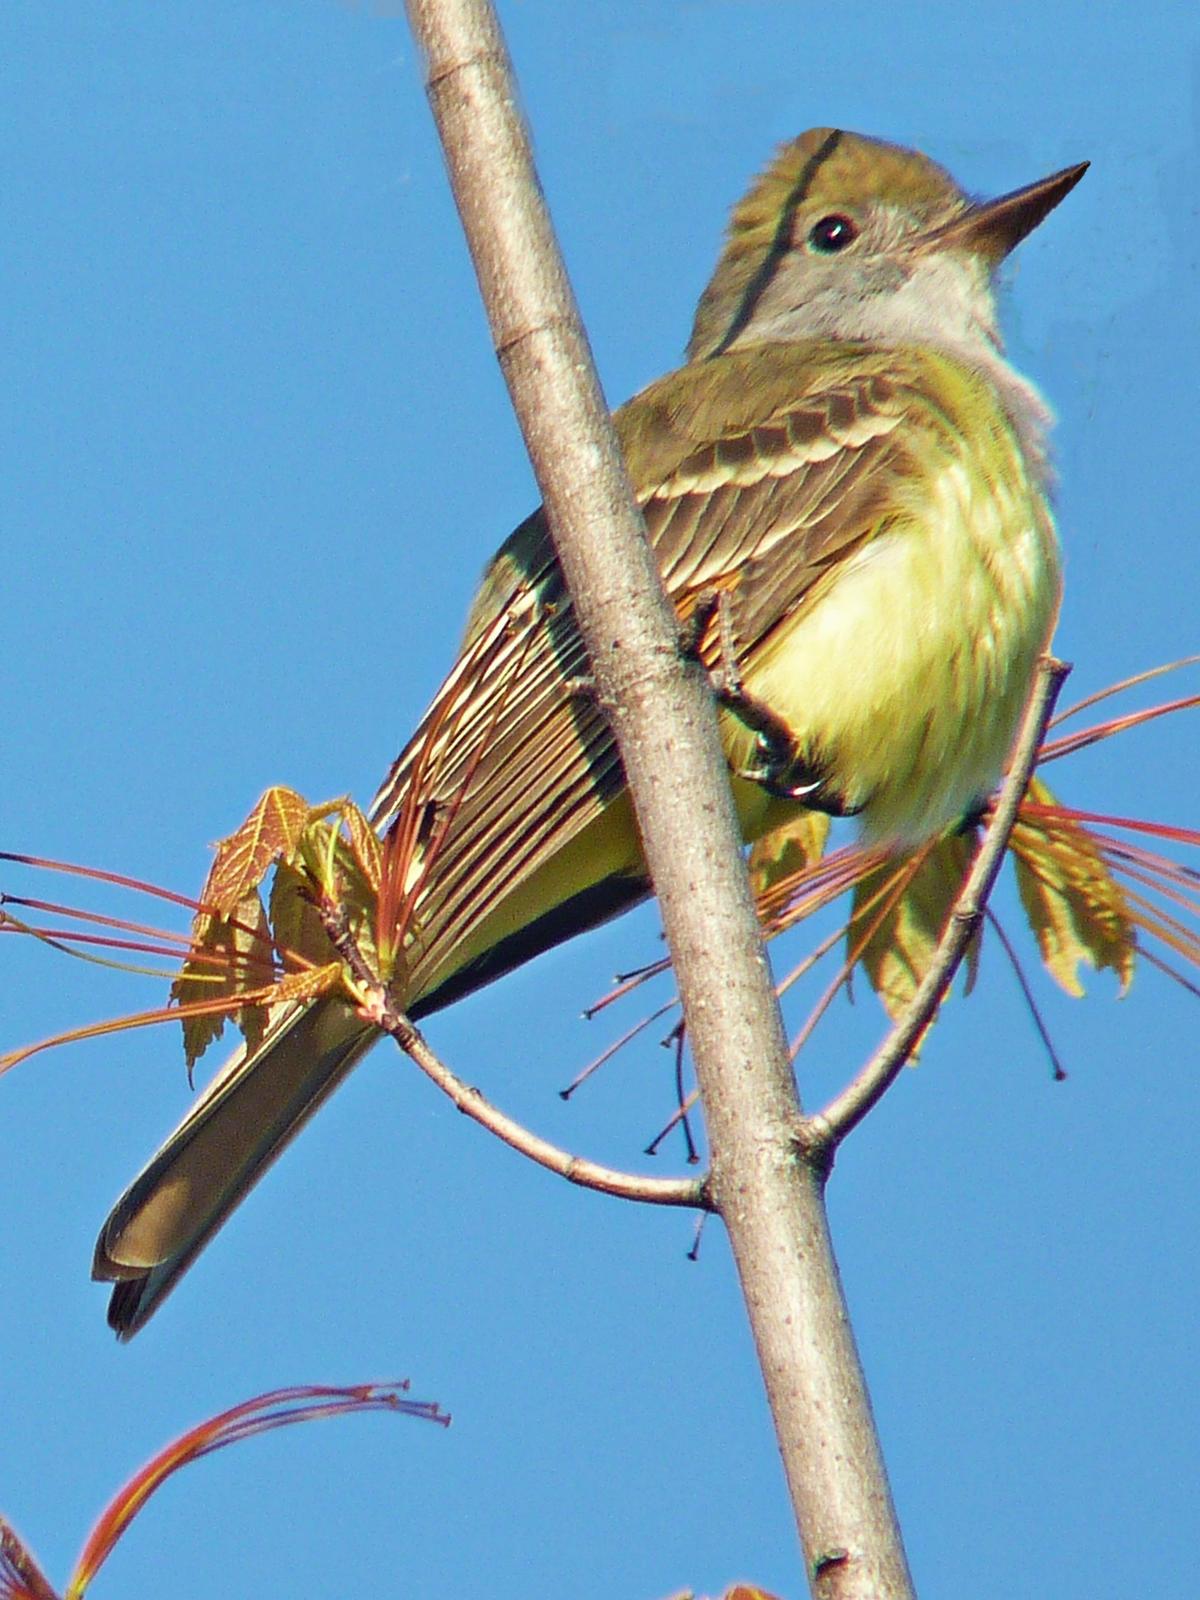 Great Crested Flycatcher Photo by Bob Neugebauer